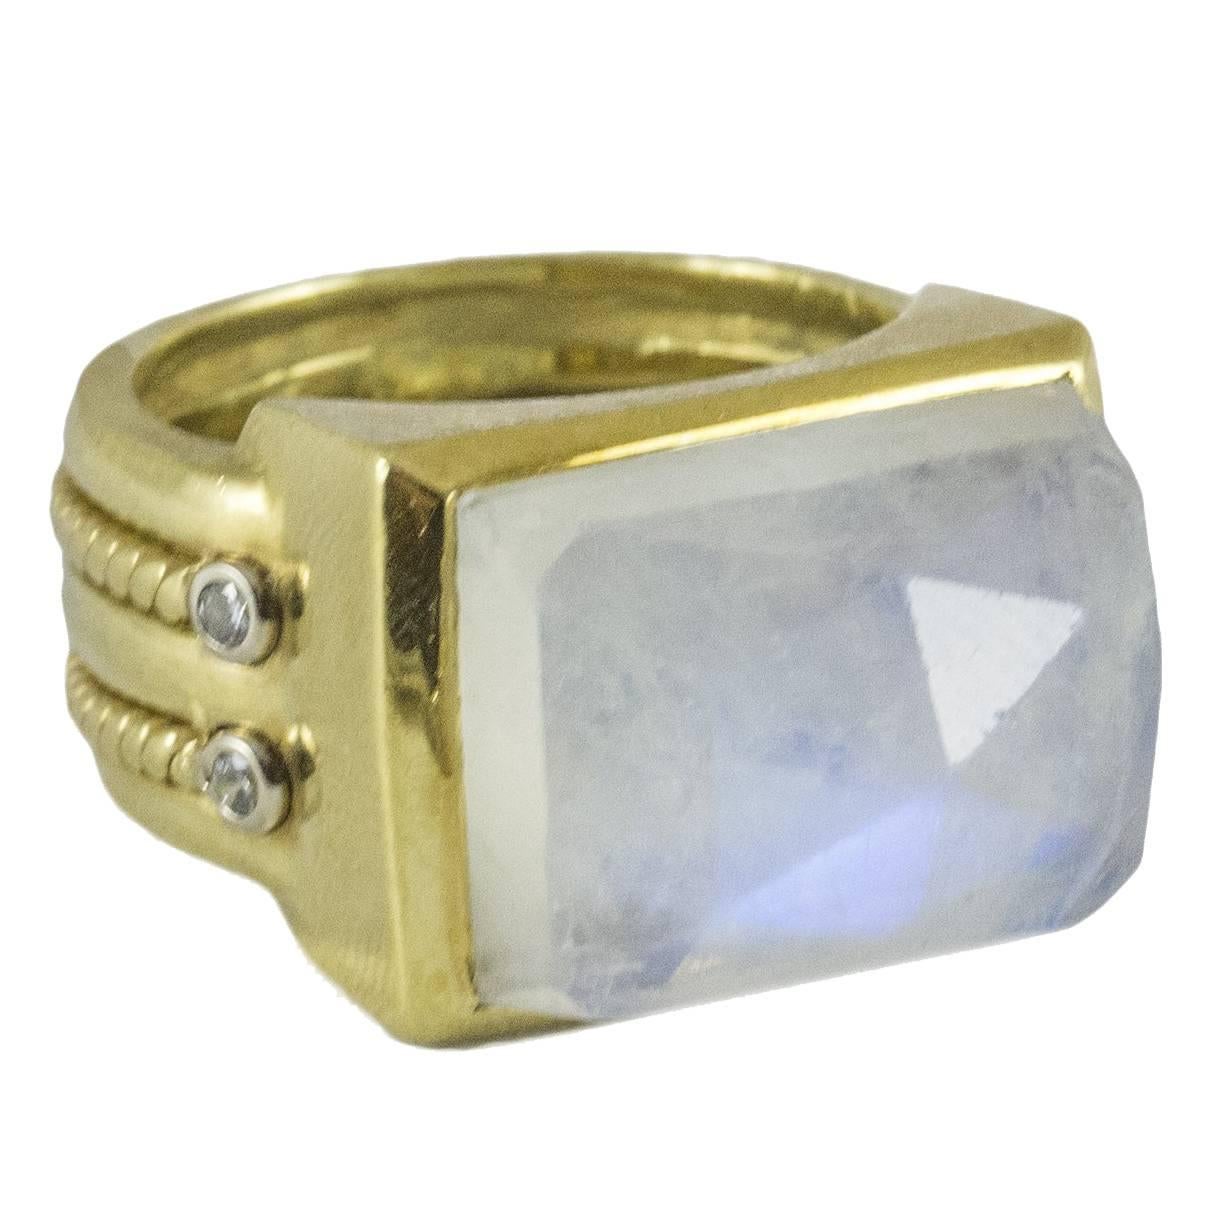 A unique vintage moonstone ring set in 18kt yellow gold. The moonstone is faceted and reflects luminous colours from the surrounding environment. It has a wide custom made band with intricate rope detailing finished by four bright brilliant cut